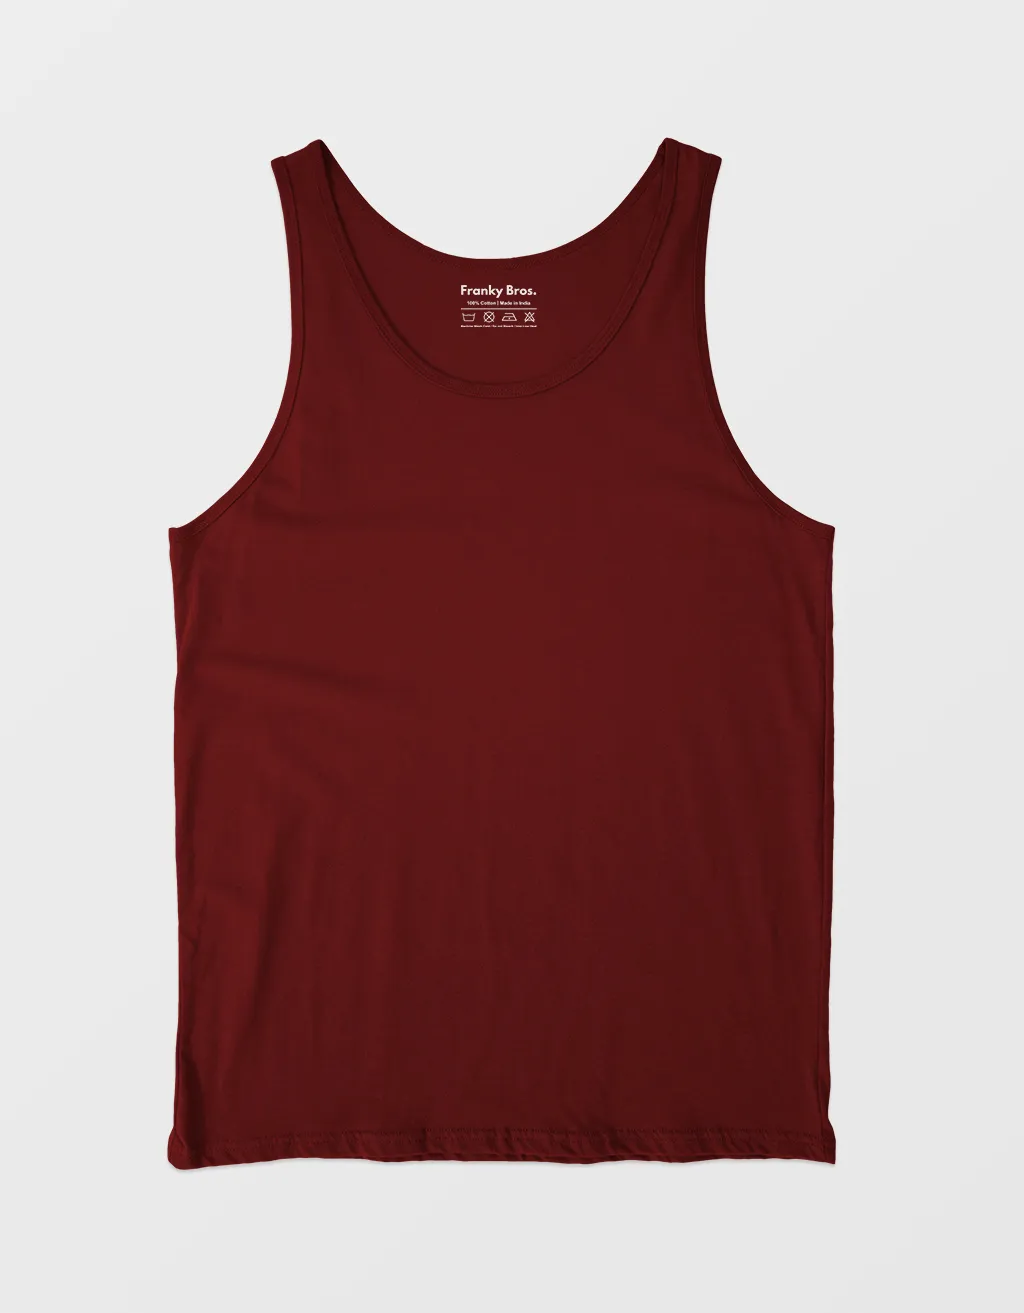 cotton maroon tank top for women and men gym vest online in india